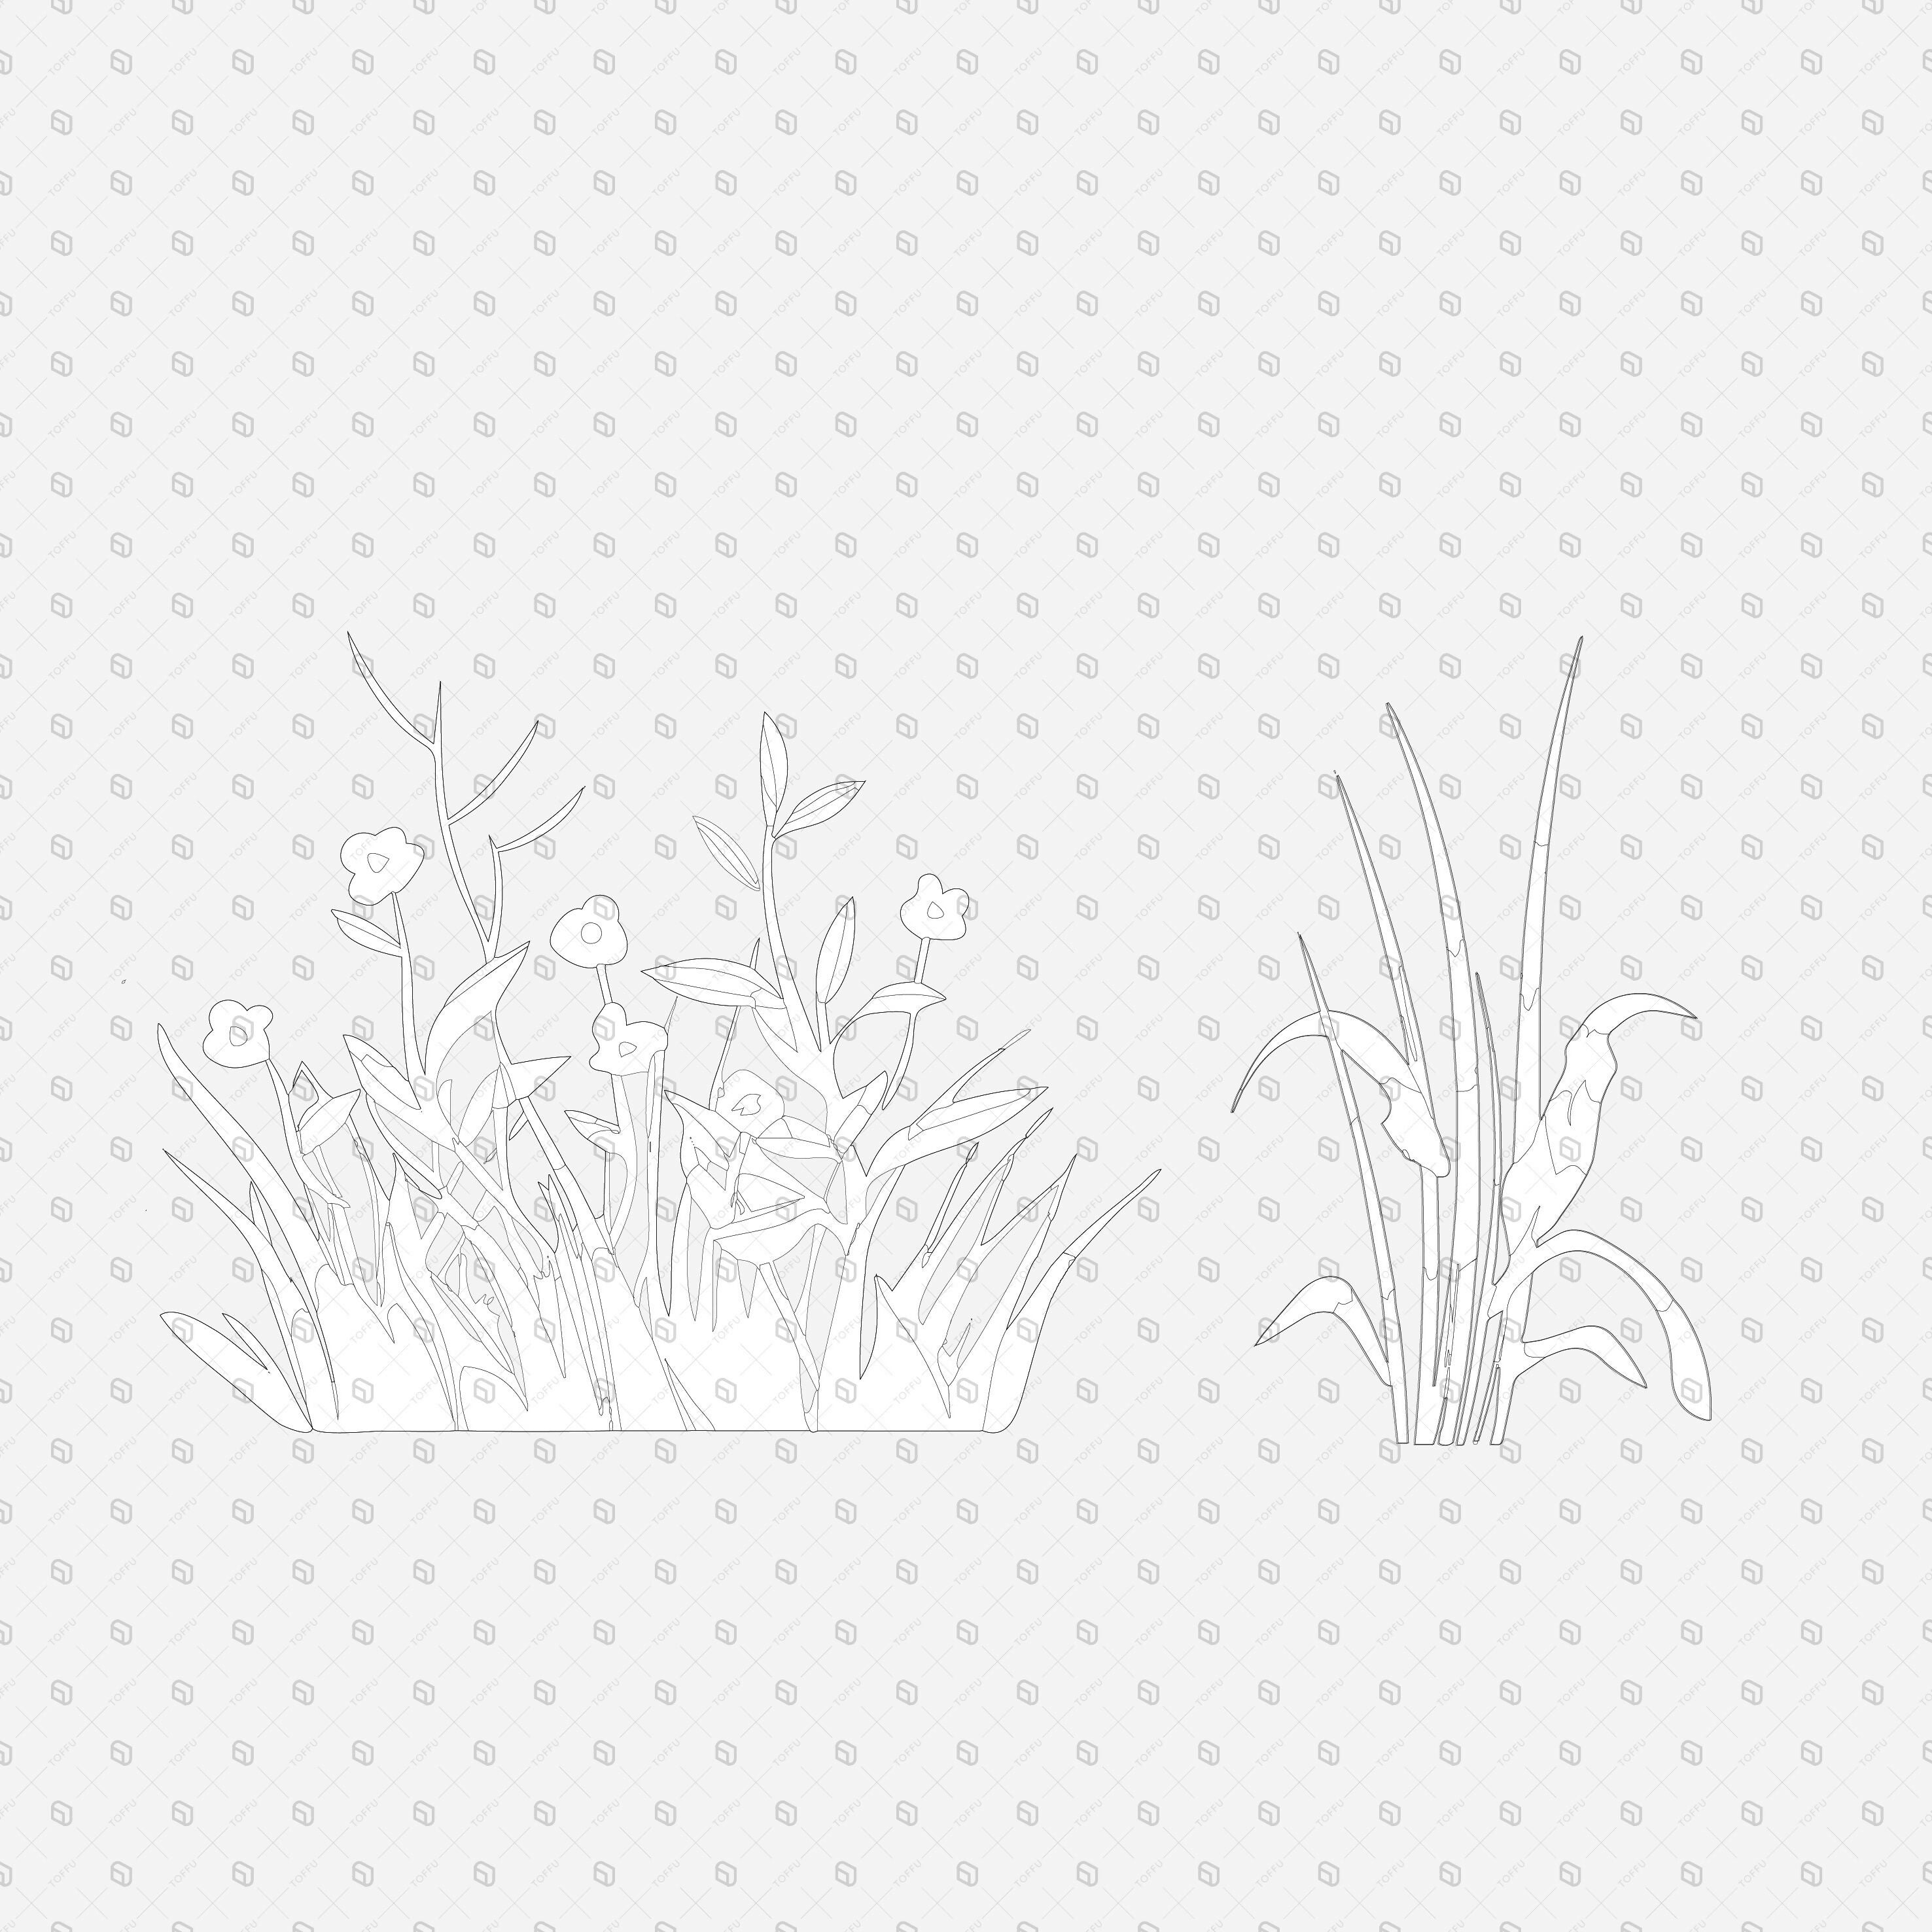 Cad Vegetation Plants and Grass 2 PNG - Toffu Co